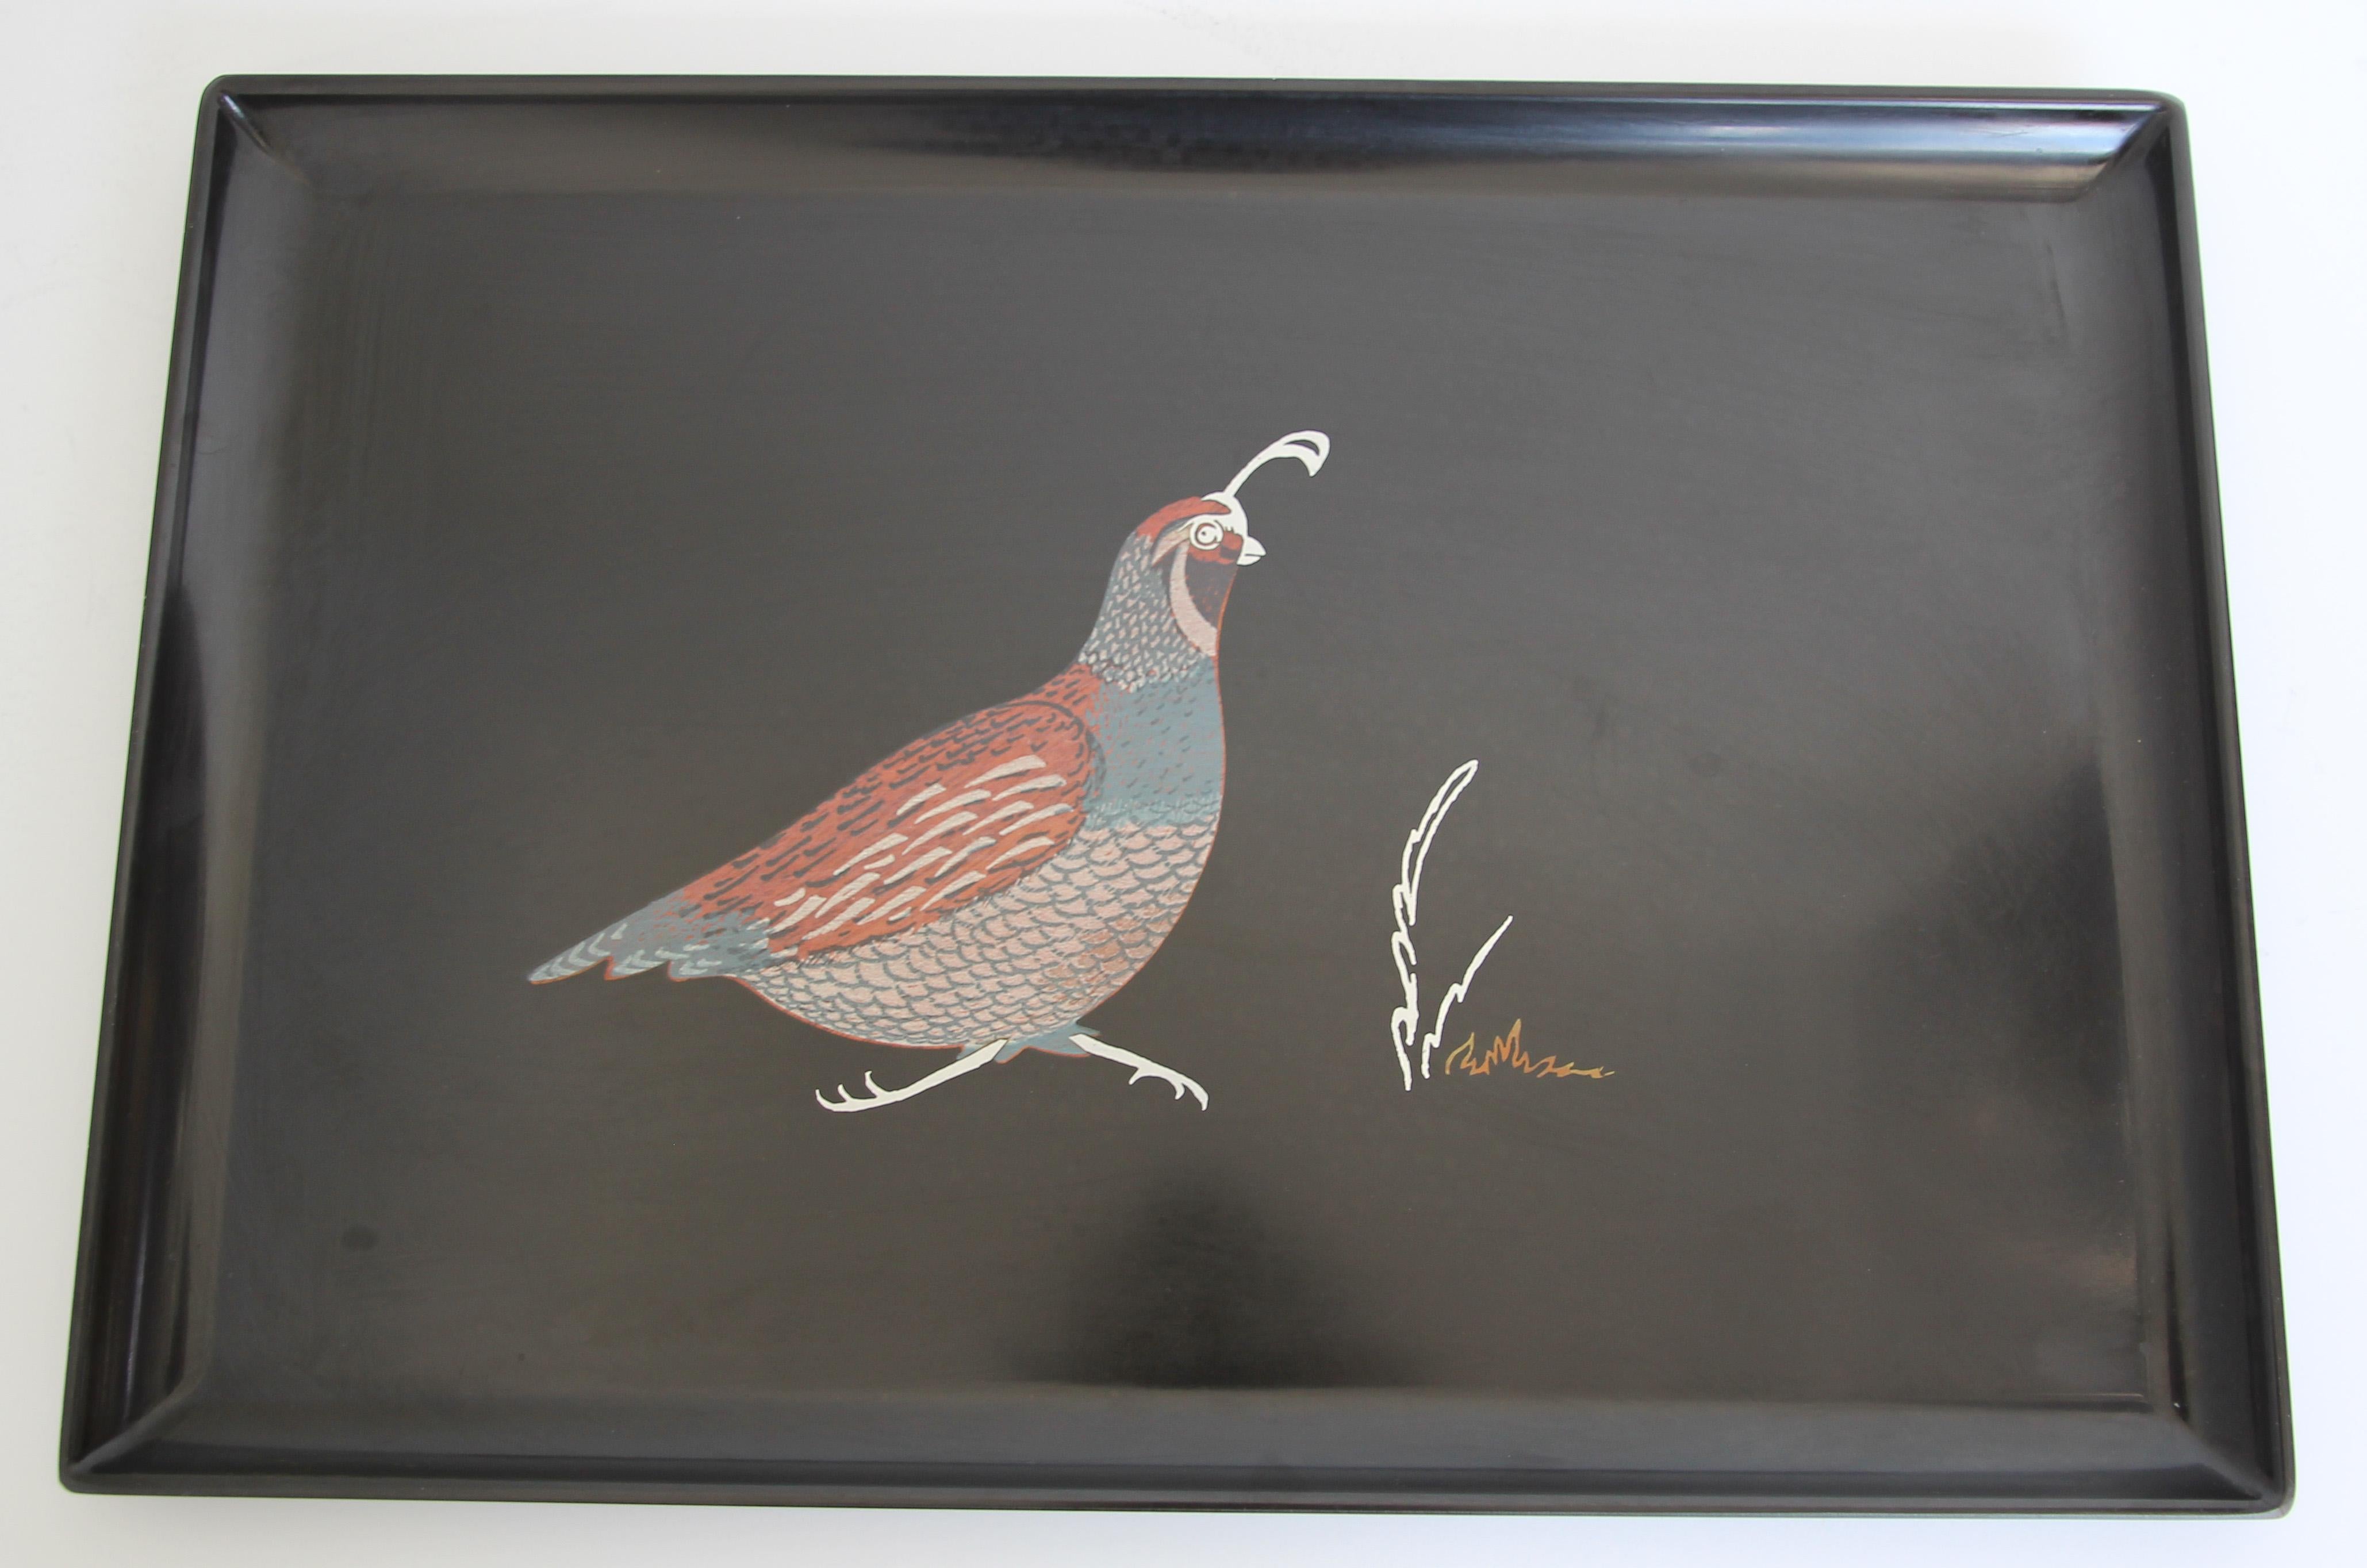 Large Mid-Century Modern Couroc of Monterey California bird design barware serving tray.
A mid century beautiful Couroc barware tray featuring a bird made up of the classic Couroc inlay techniques by master craftspeople using a variety of materials